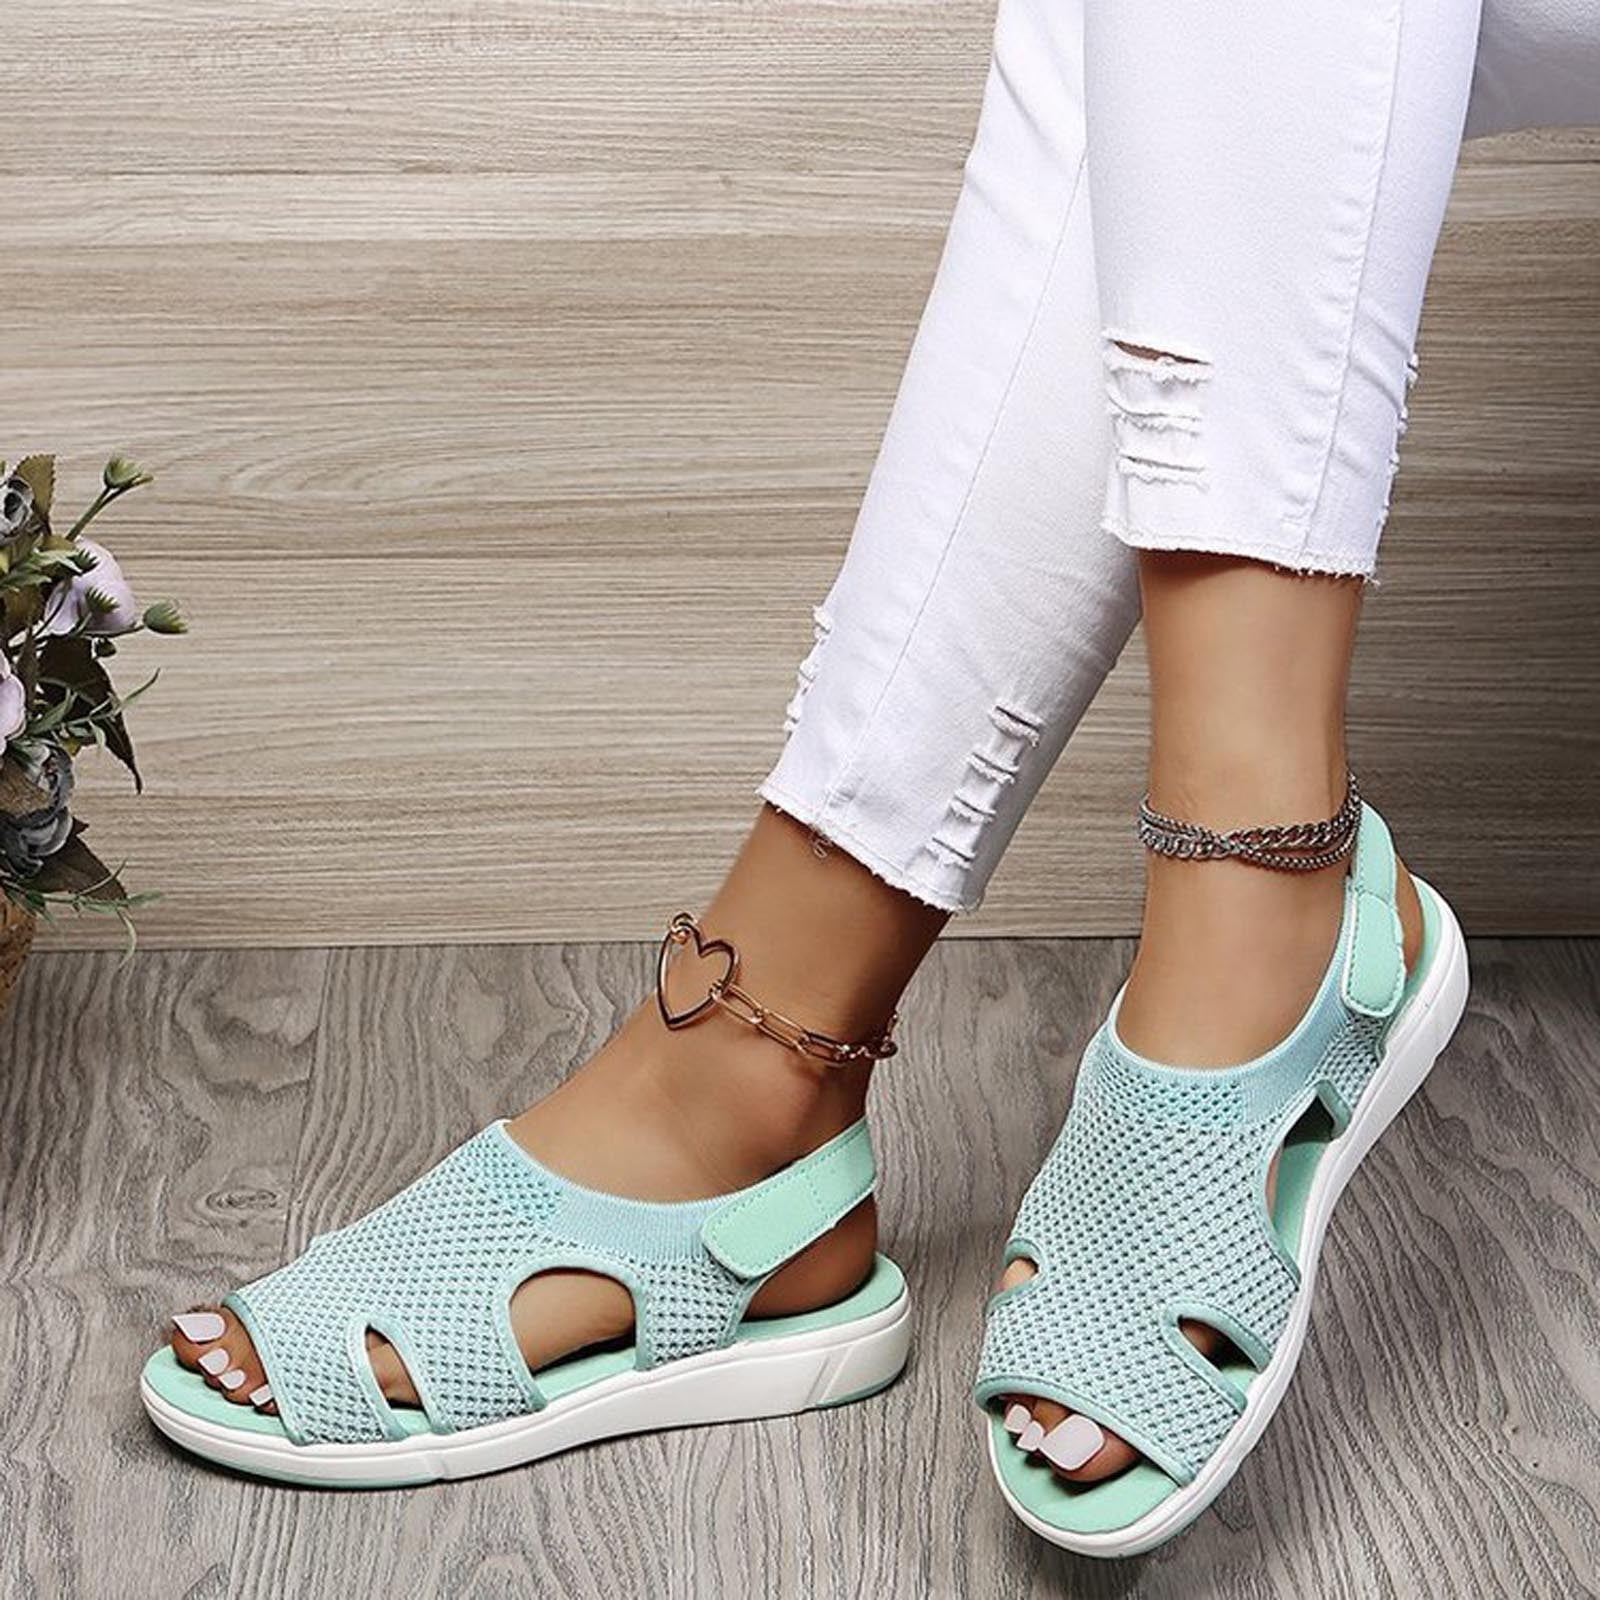 Women's Summer Sandals Casual Bohemia Gladiator Wedge Shoes Comfortable Ankle Strap Outdoor Platform Sandals 